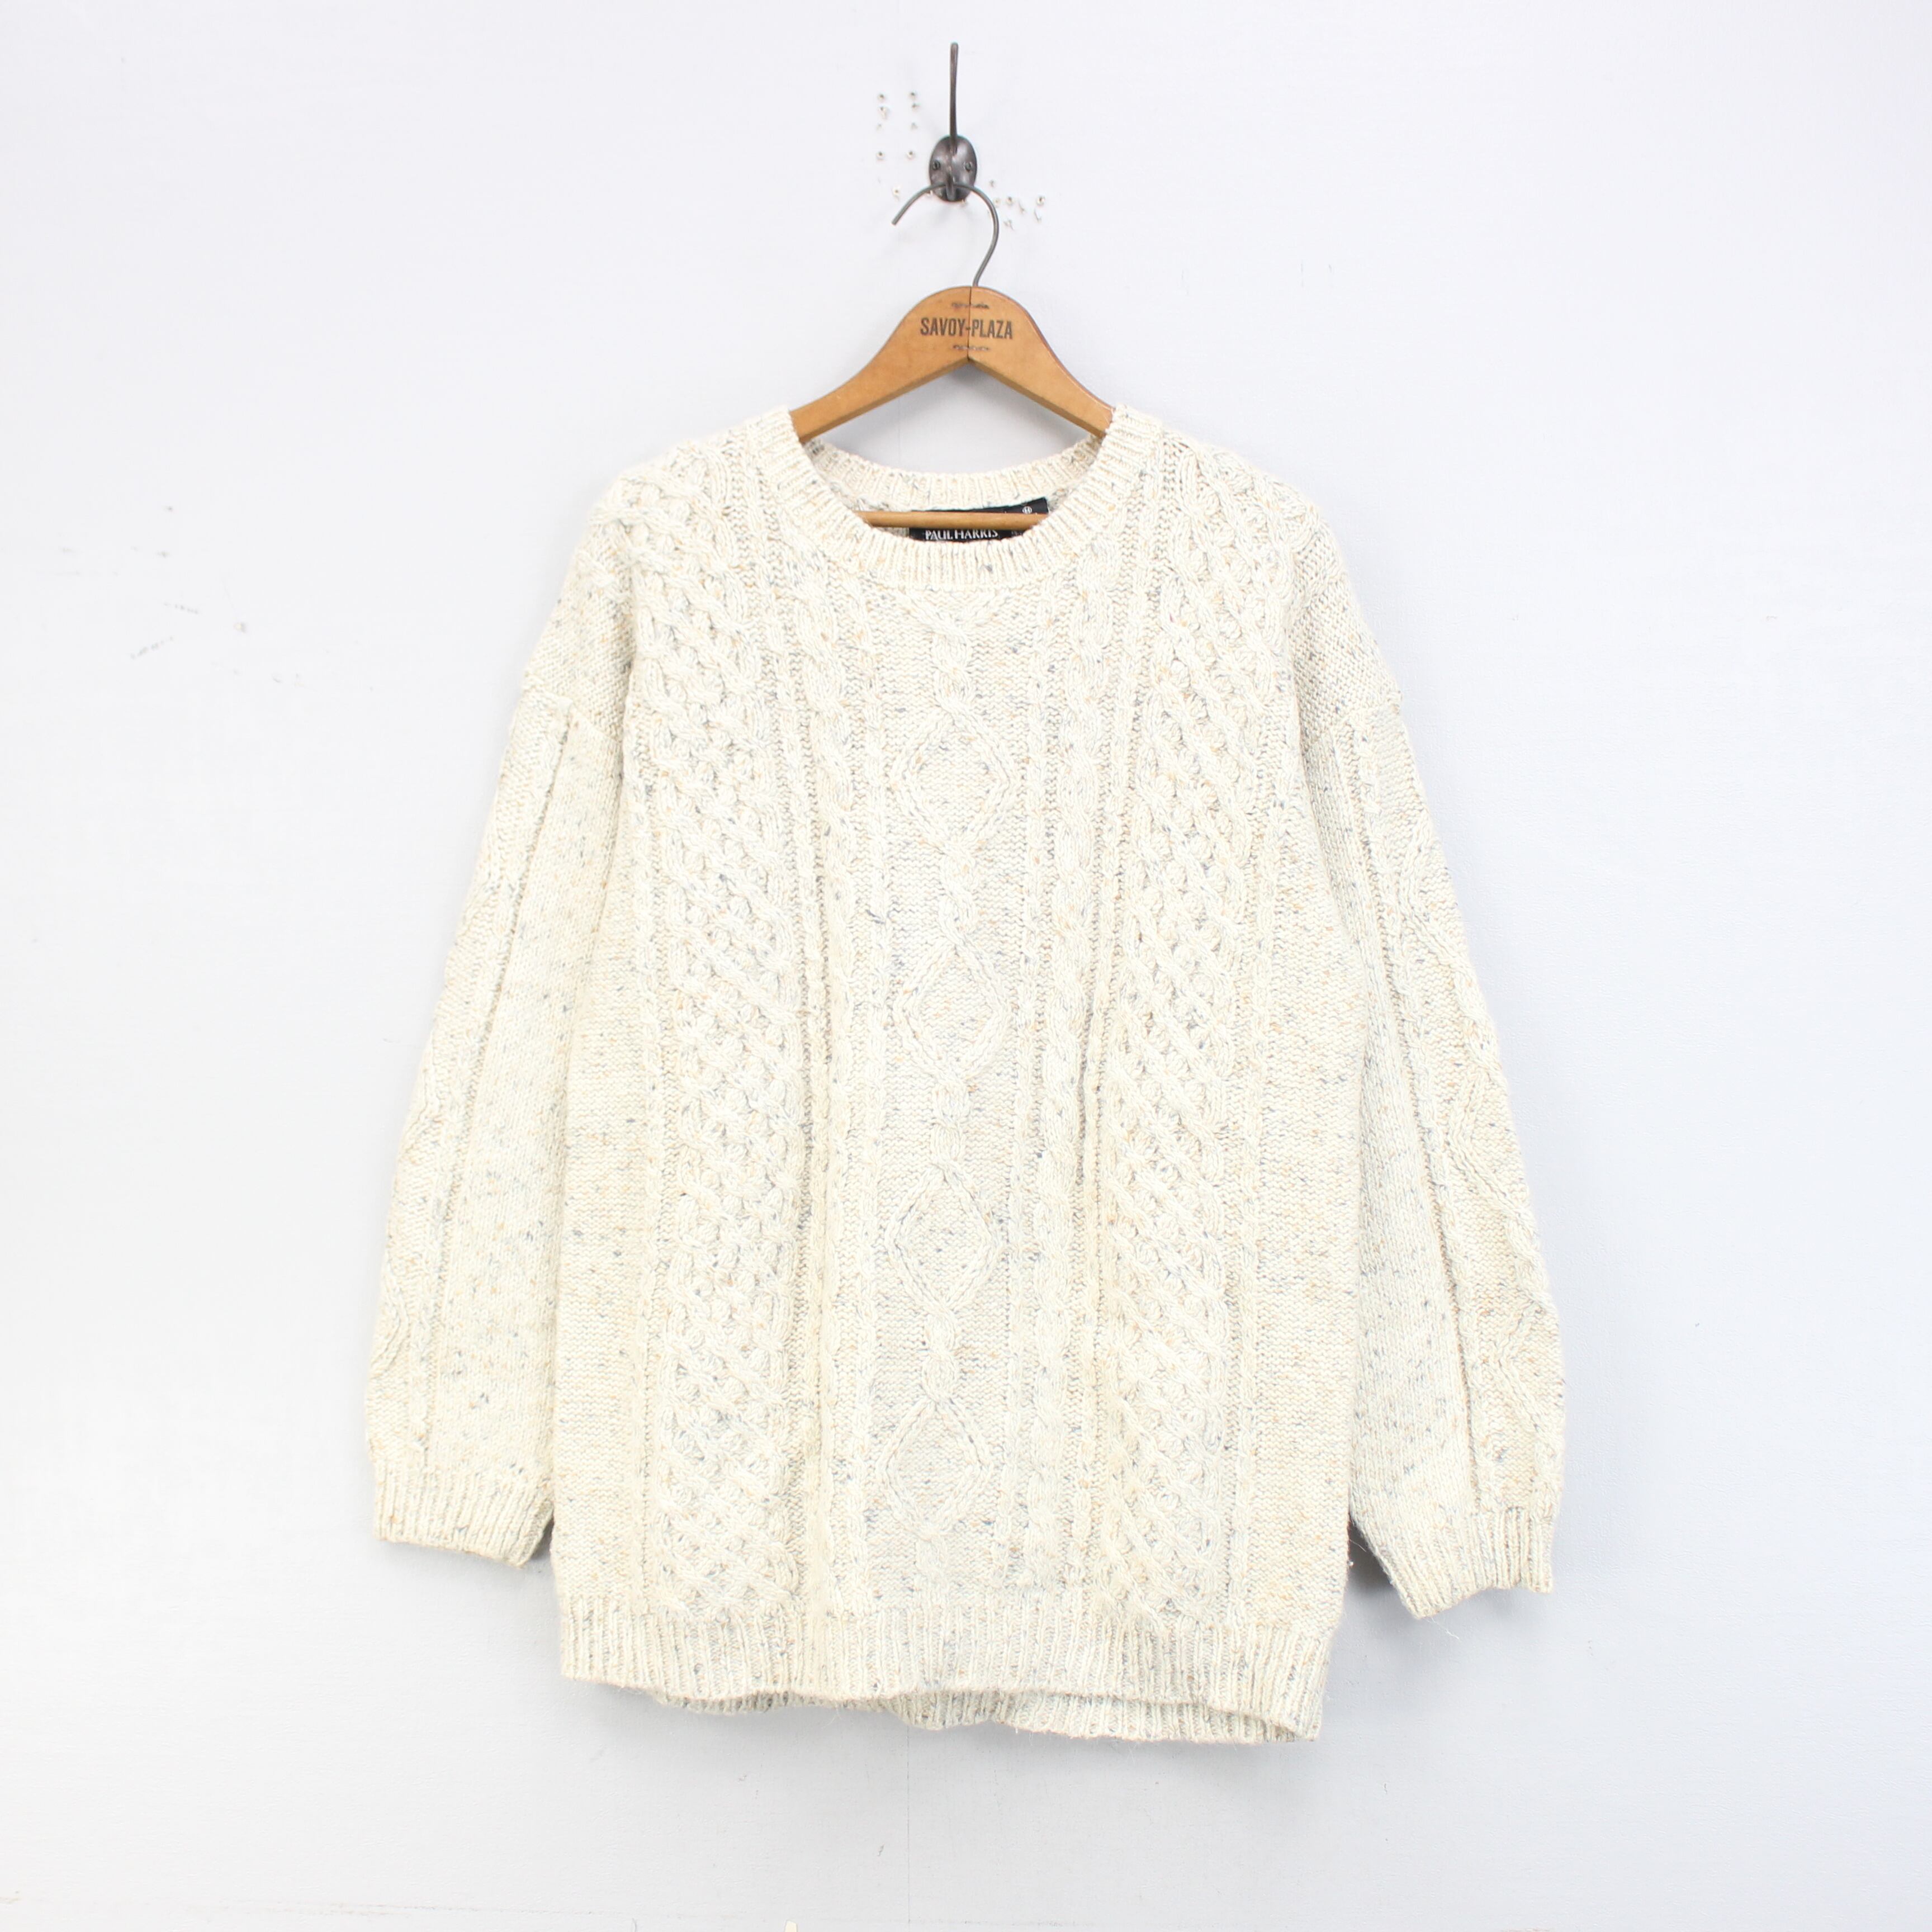 USA VINTAGE PAUL HARRIS CABLE DESIGN KNIT/アメリカ古着ケーブル